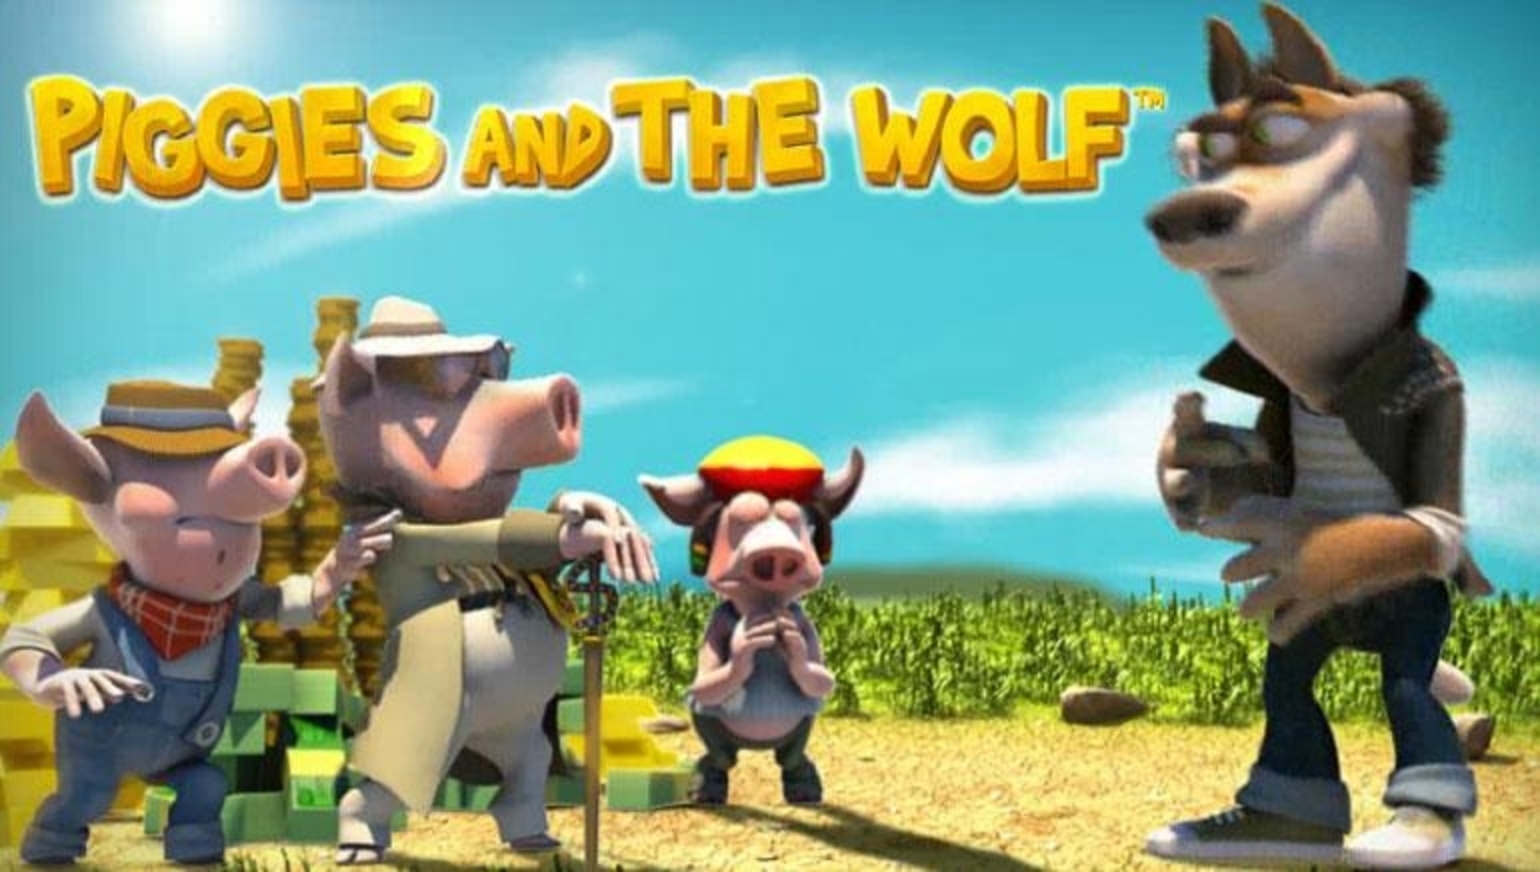 Piggies and The Wolf